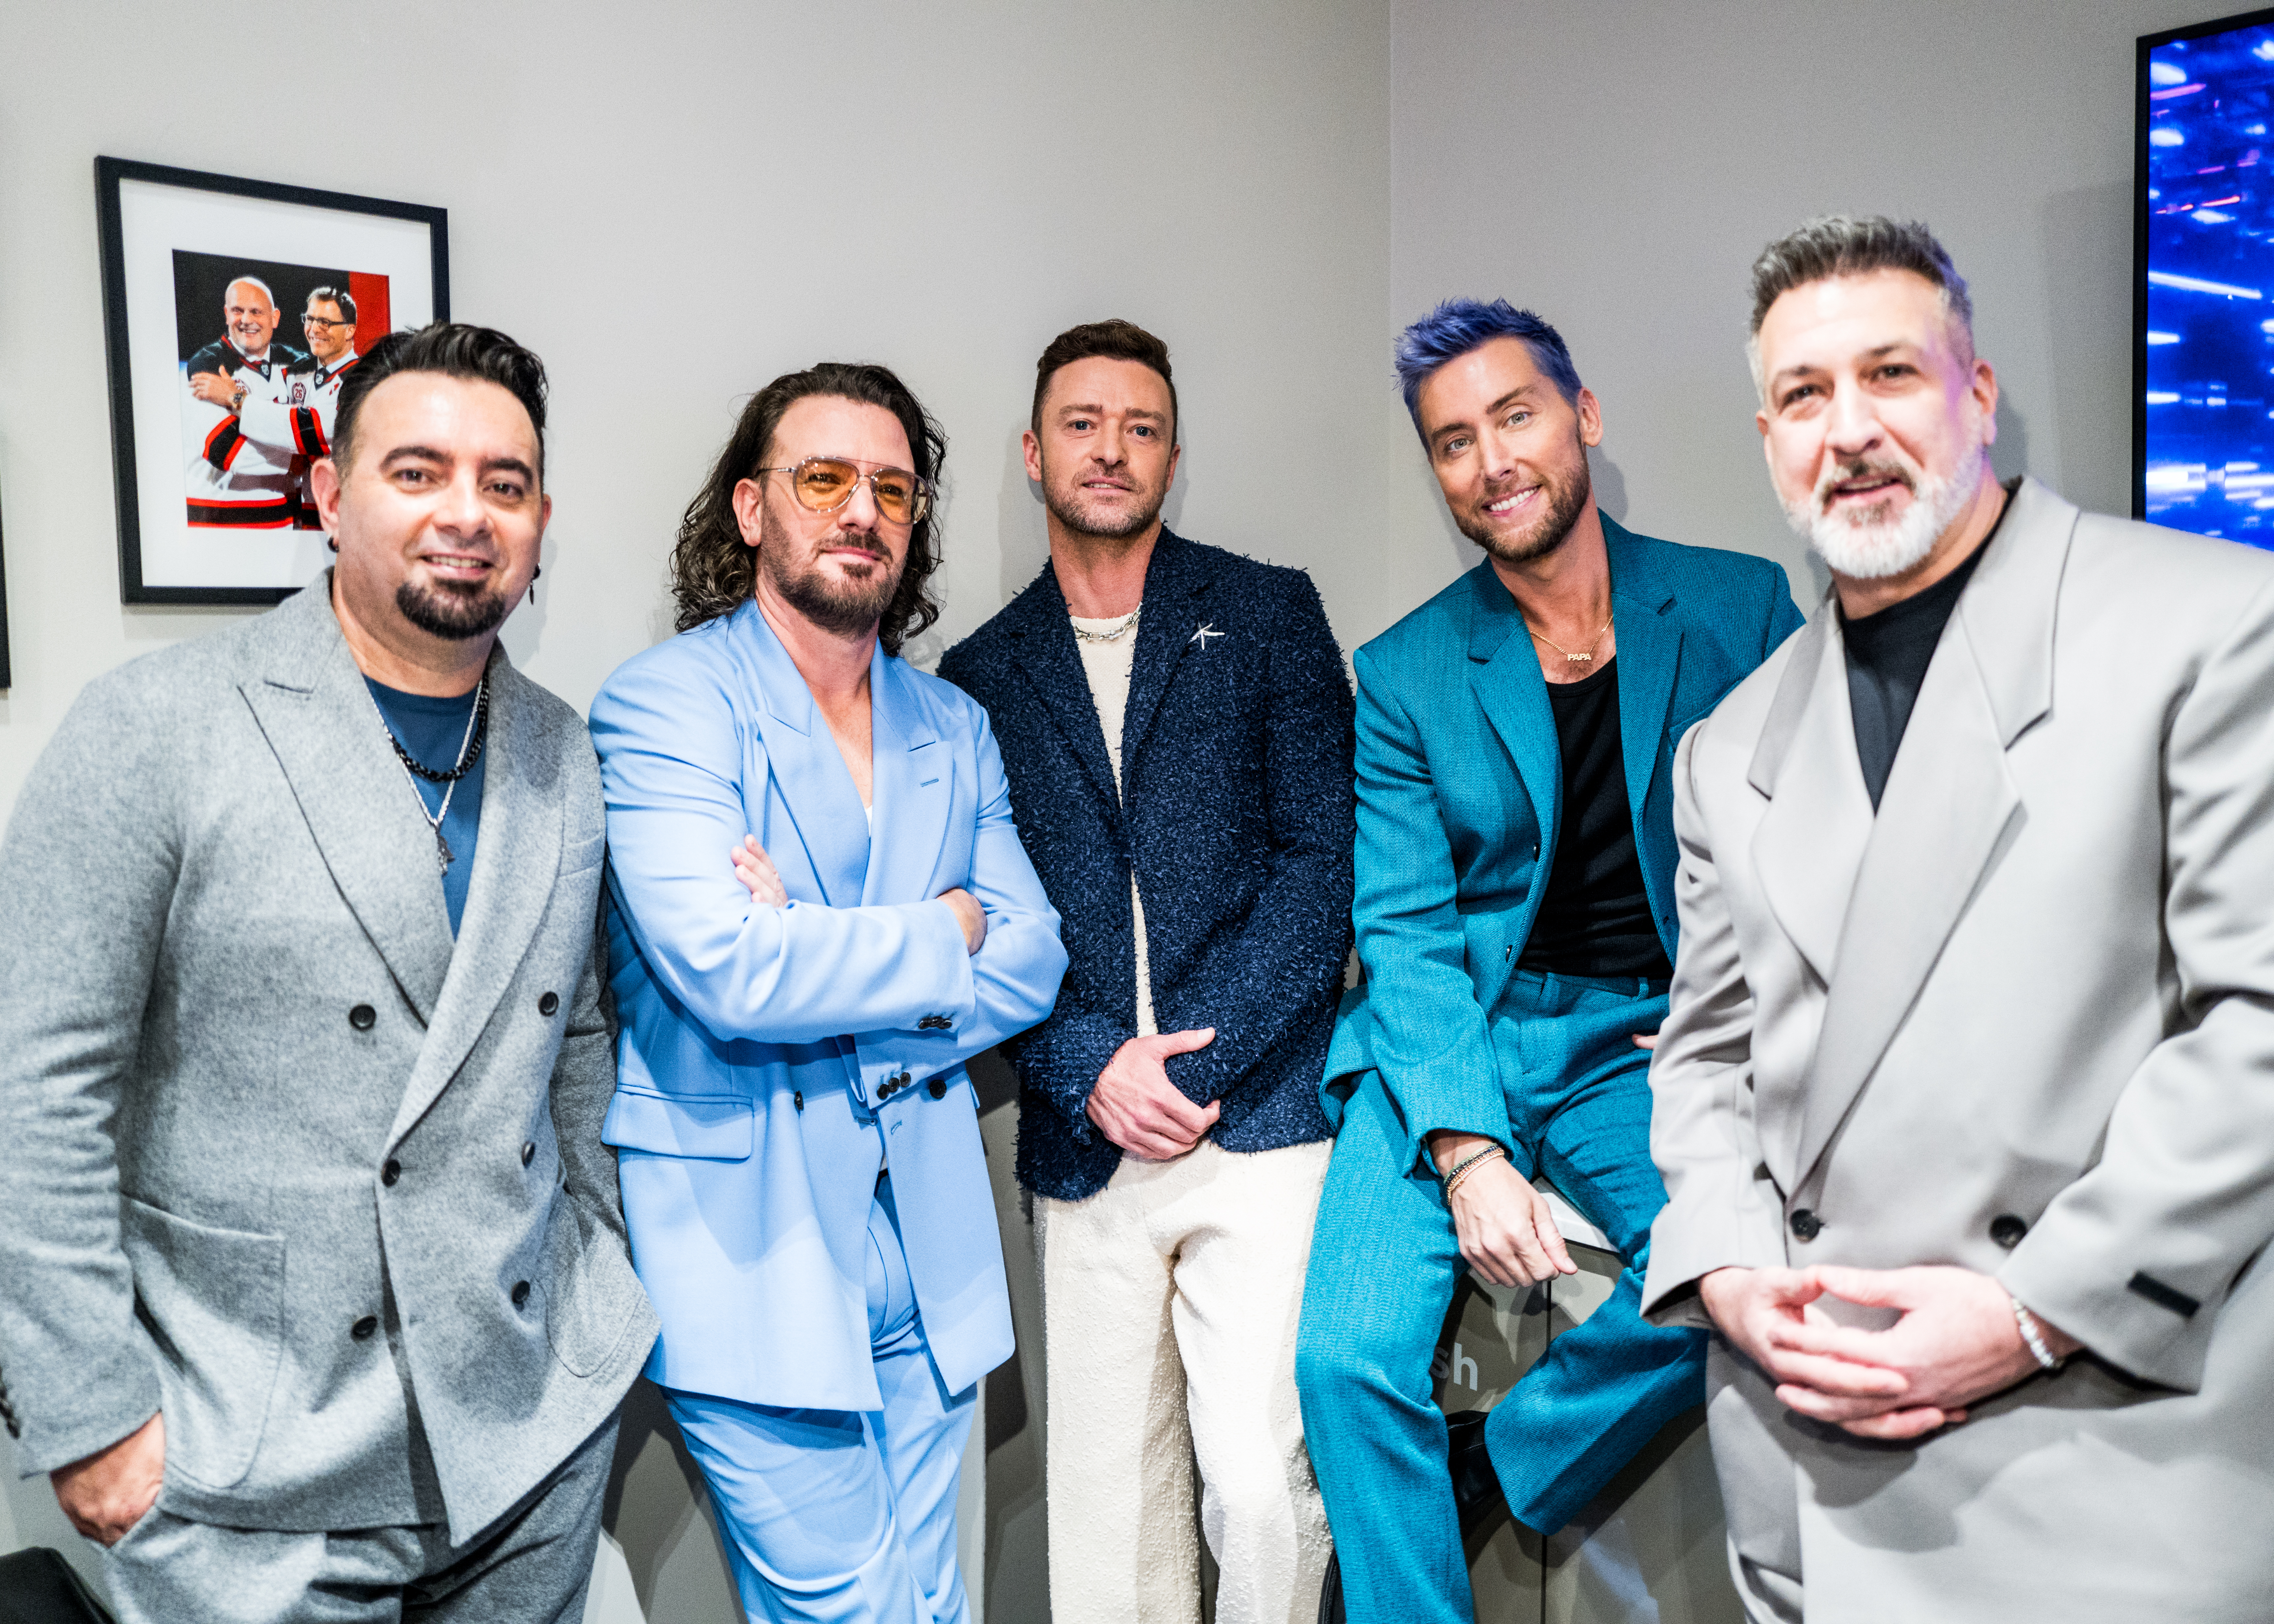 Chris Kirkpatrick, JC Chasez, Justin Timberlake, Lance Bass, and Joey Fatone of *NSYNC during the 2023 Video Music Awards at Prudential Center on September 12, 2023 in Newark, New Jersey | Source: Getty Images